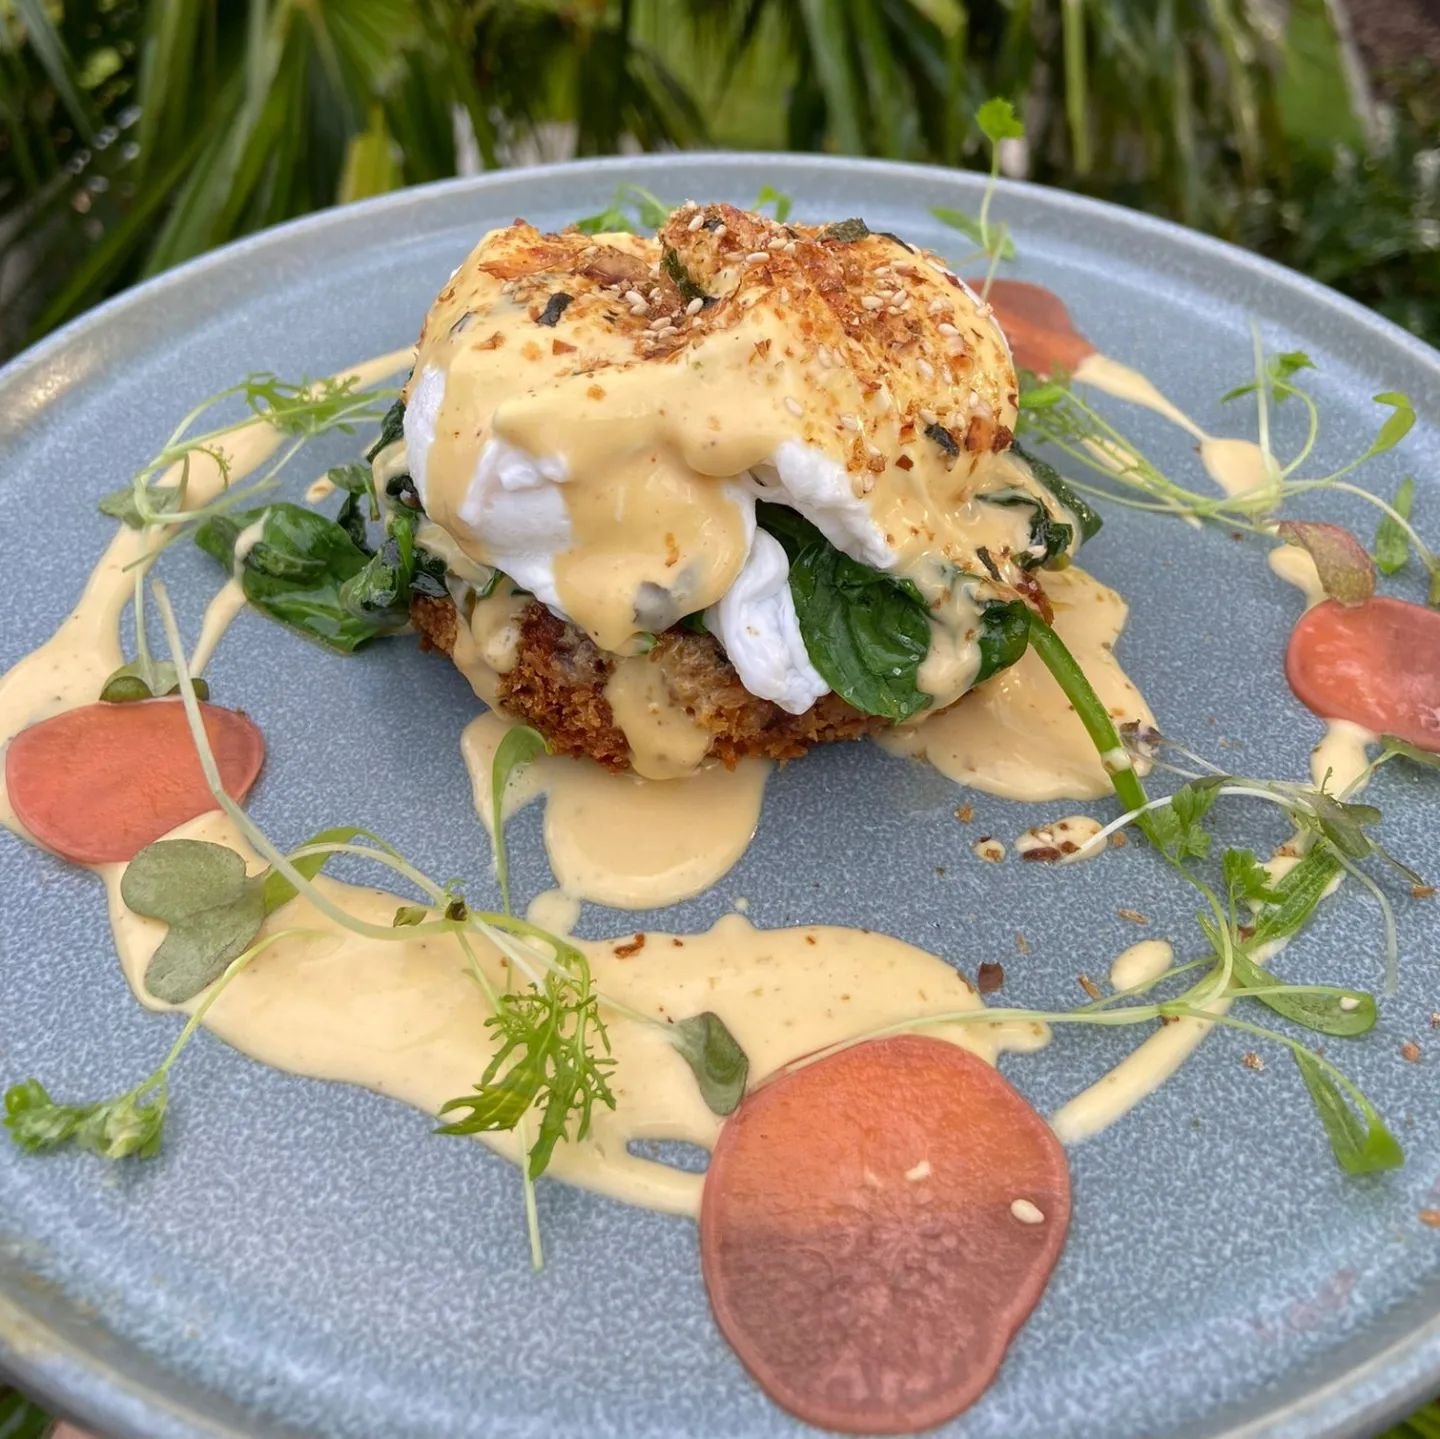 Get ready for a new breakfast special 

Salmon fish cake

Salmon and dill fish cake 
Saut&eacute;ed spinach
Two soft poached eggs
Miso infused Hollandaise 
Bonito Furikake
Pickled radish

$21.00
.
.
.
.
.
.
.
#cafeharmonyqld #cafe #harmony #sunshinec